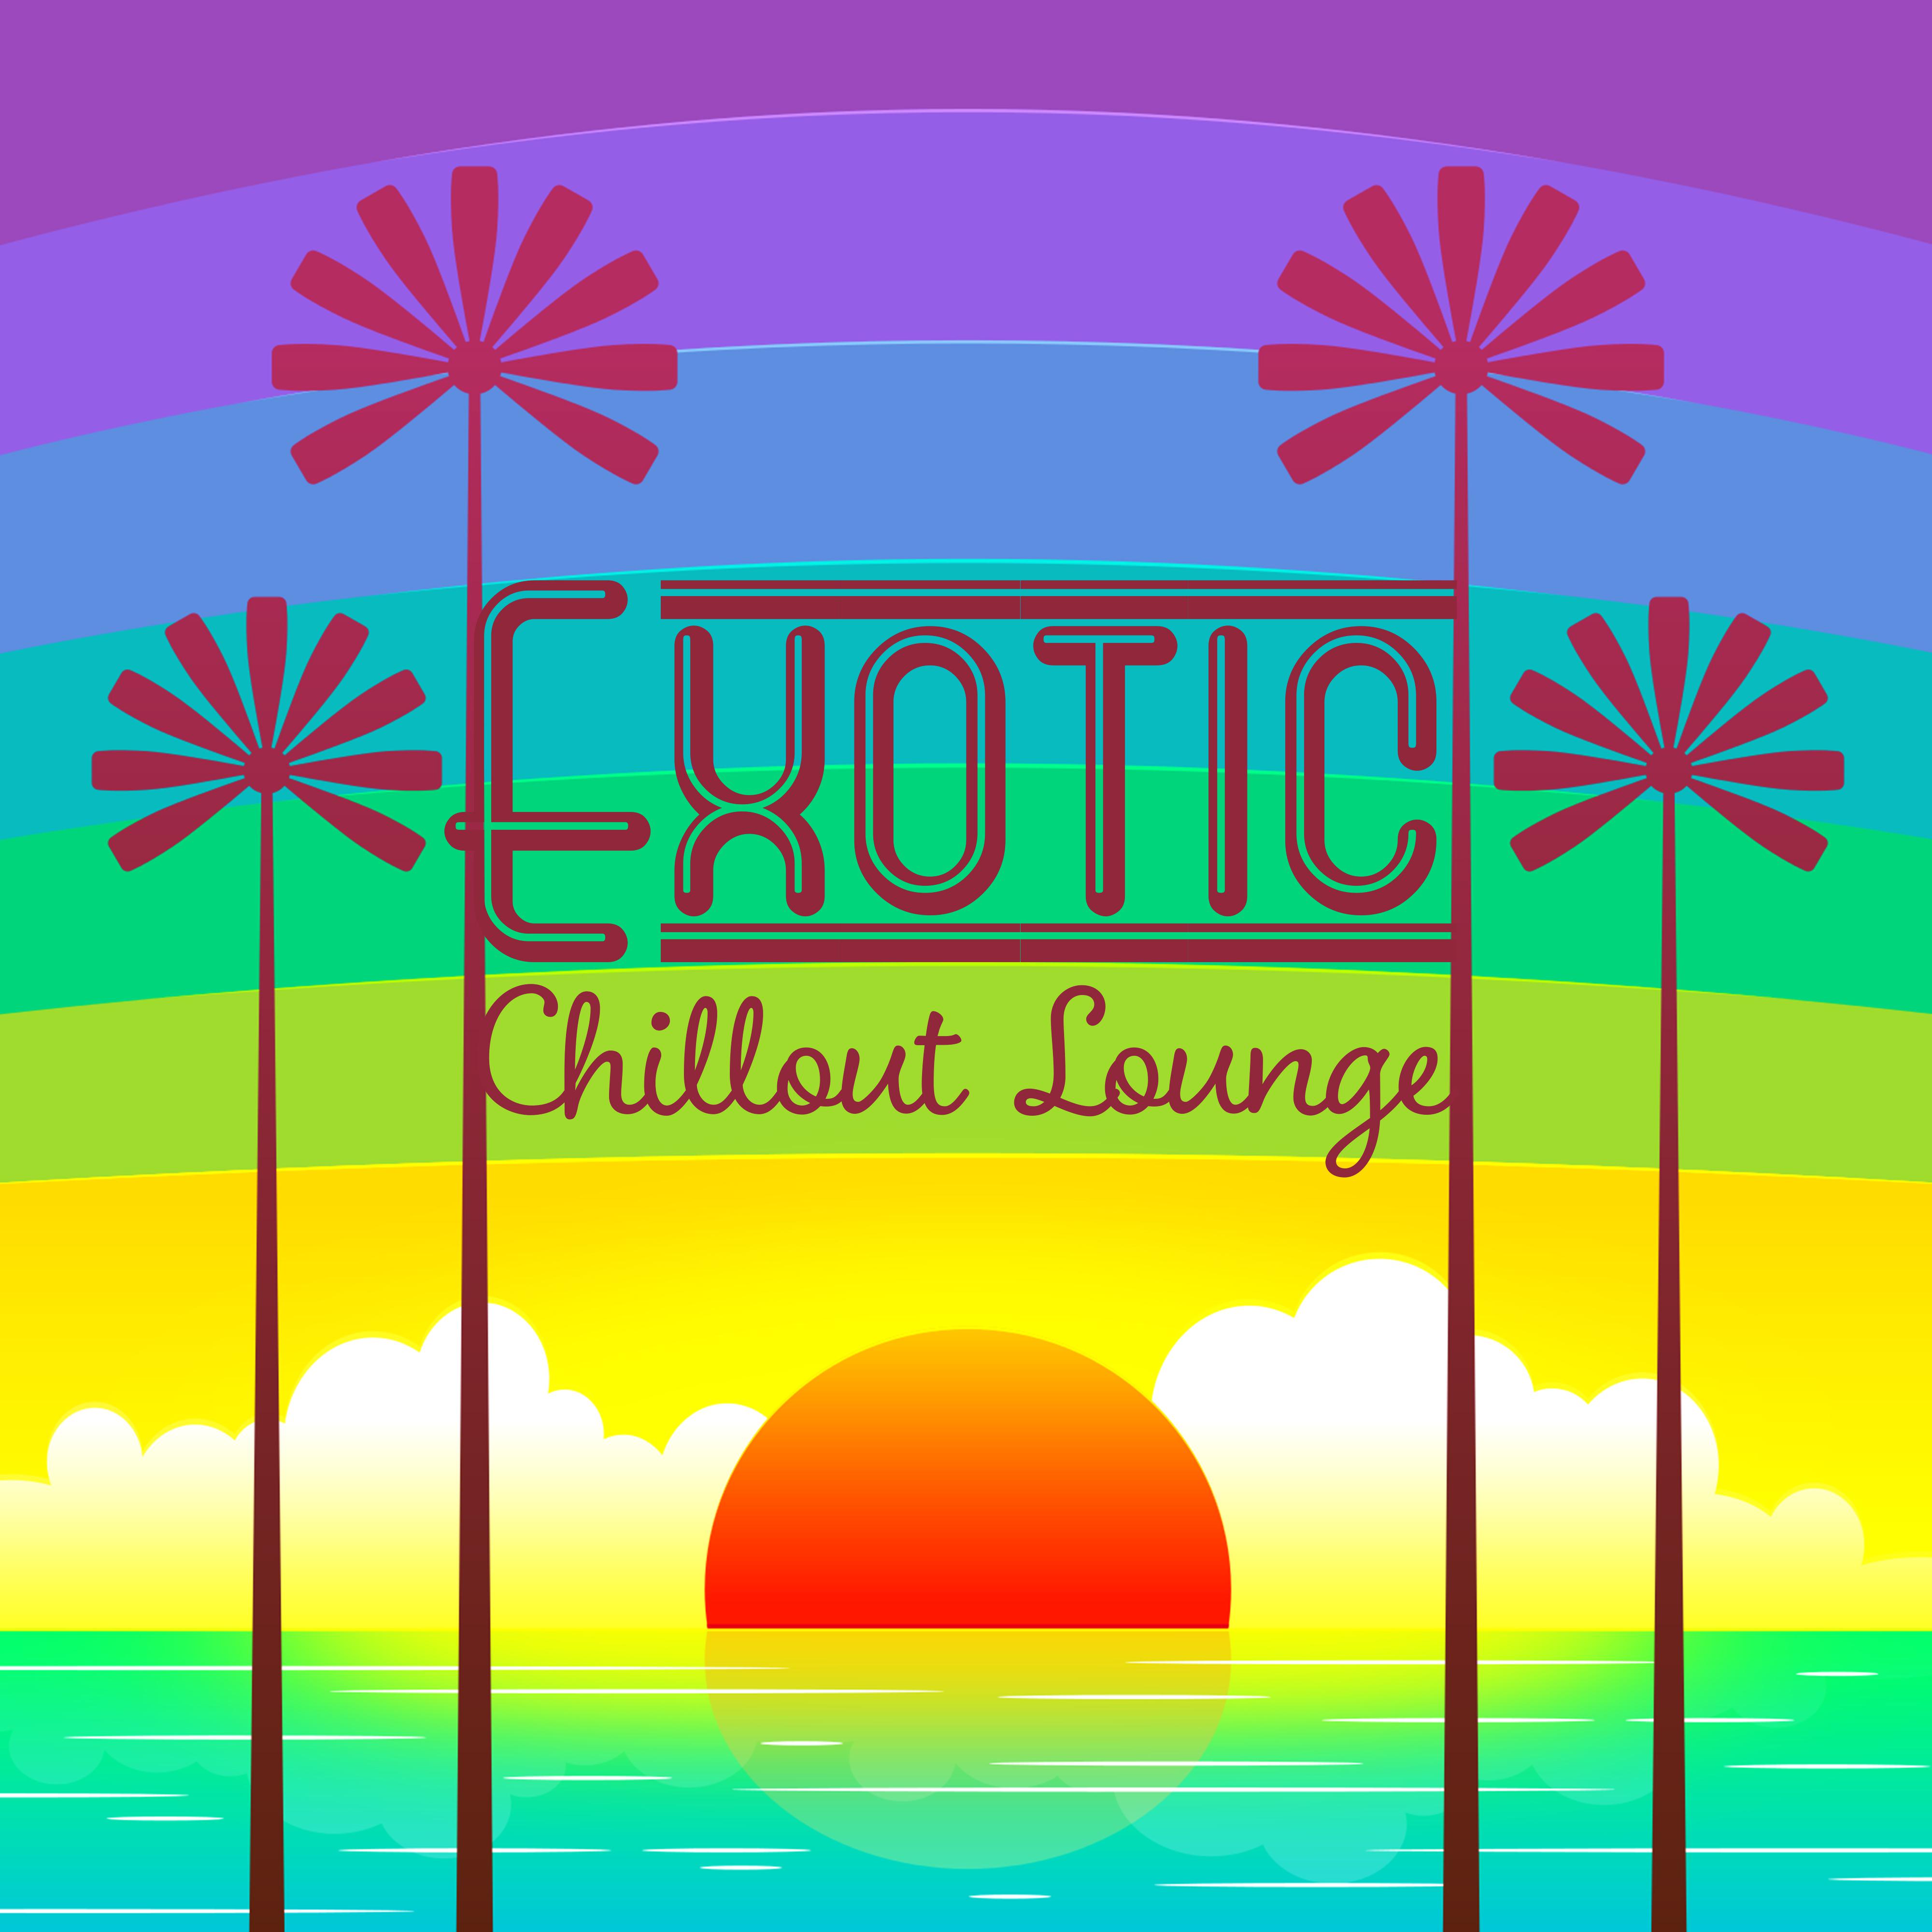 Exotic Chillout Lounge – Tropical Chilout, Summer Breeze, Beach Music, Ibiza